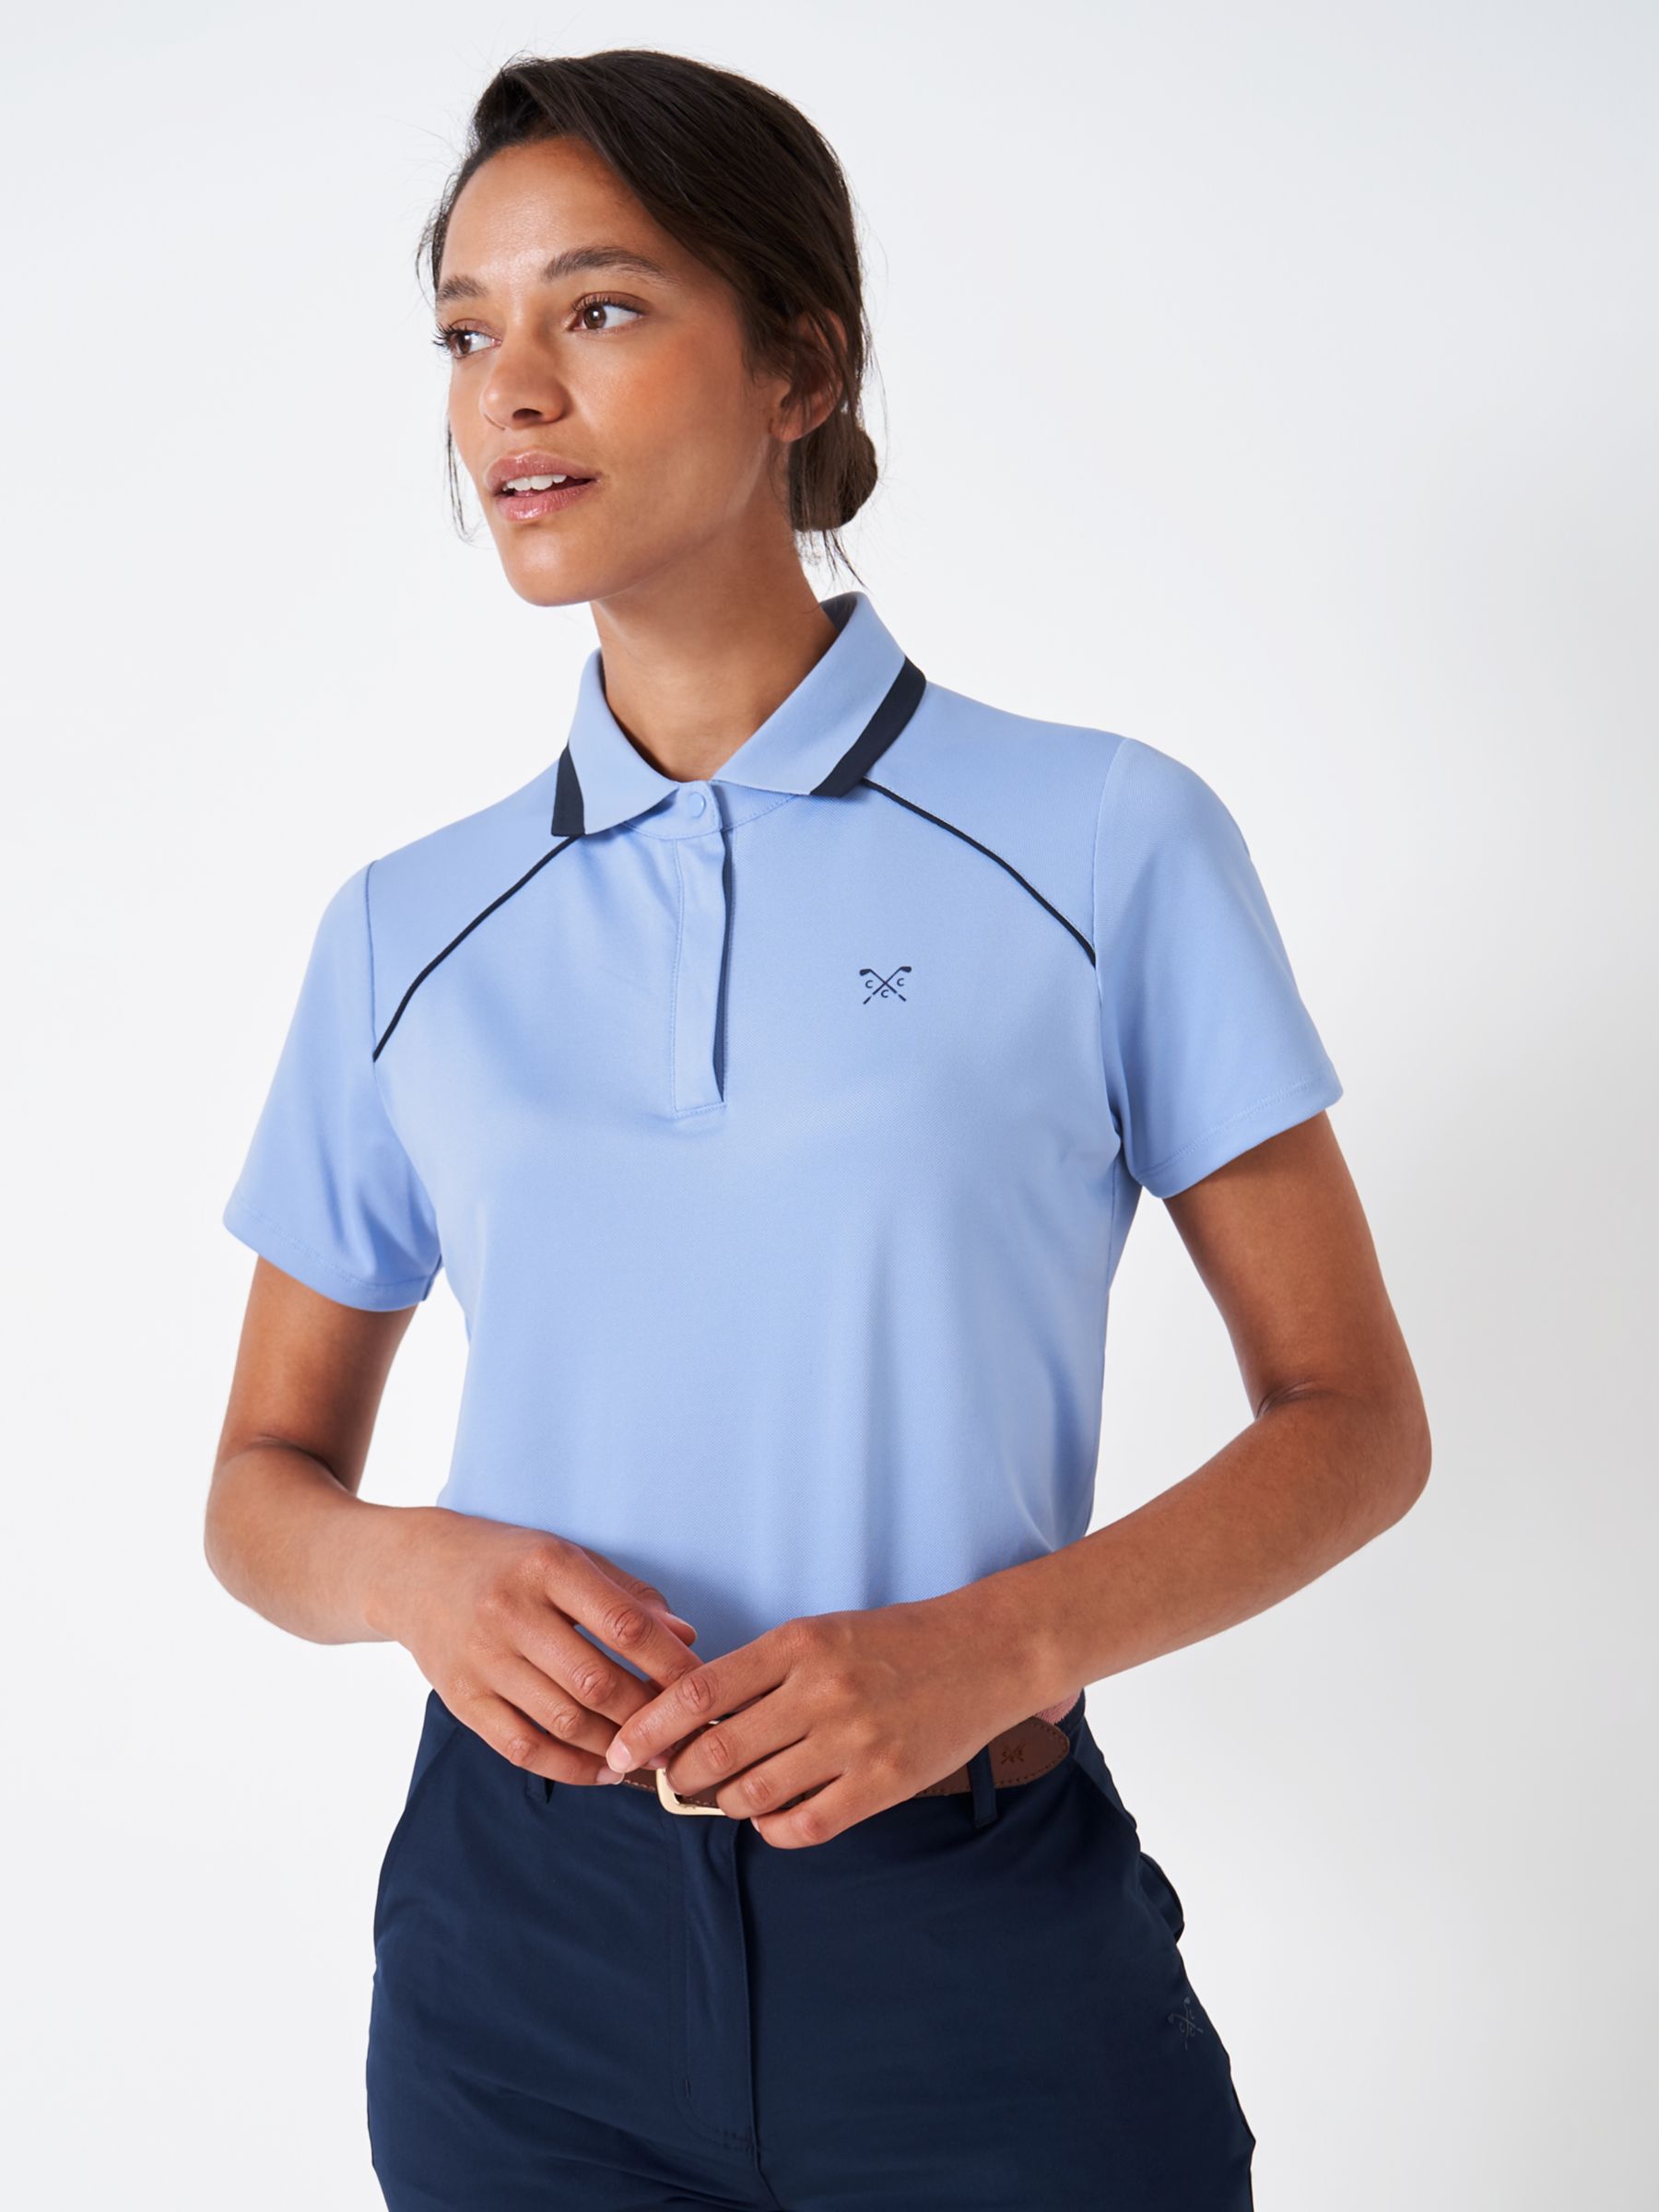 Crew Clothing Piped Cotton Golf Polo Shirt, Light Blue, 16